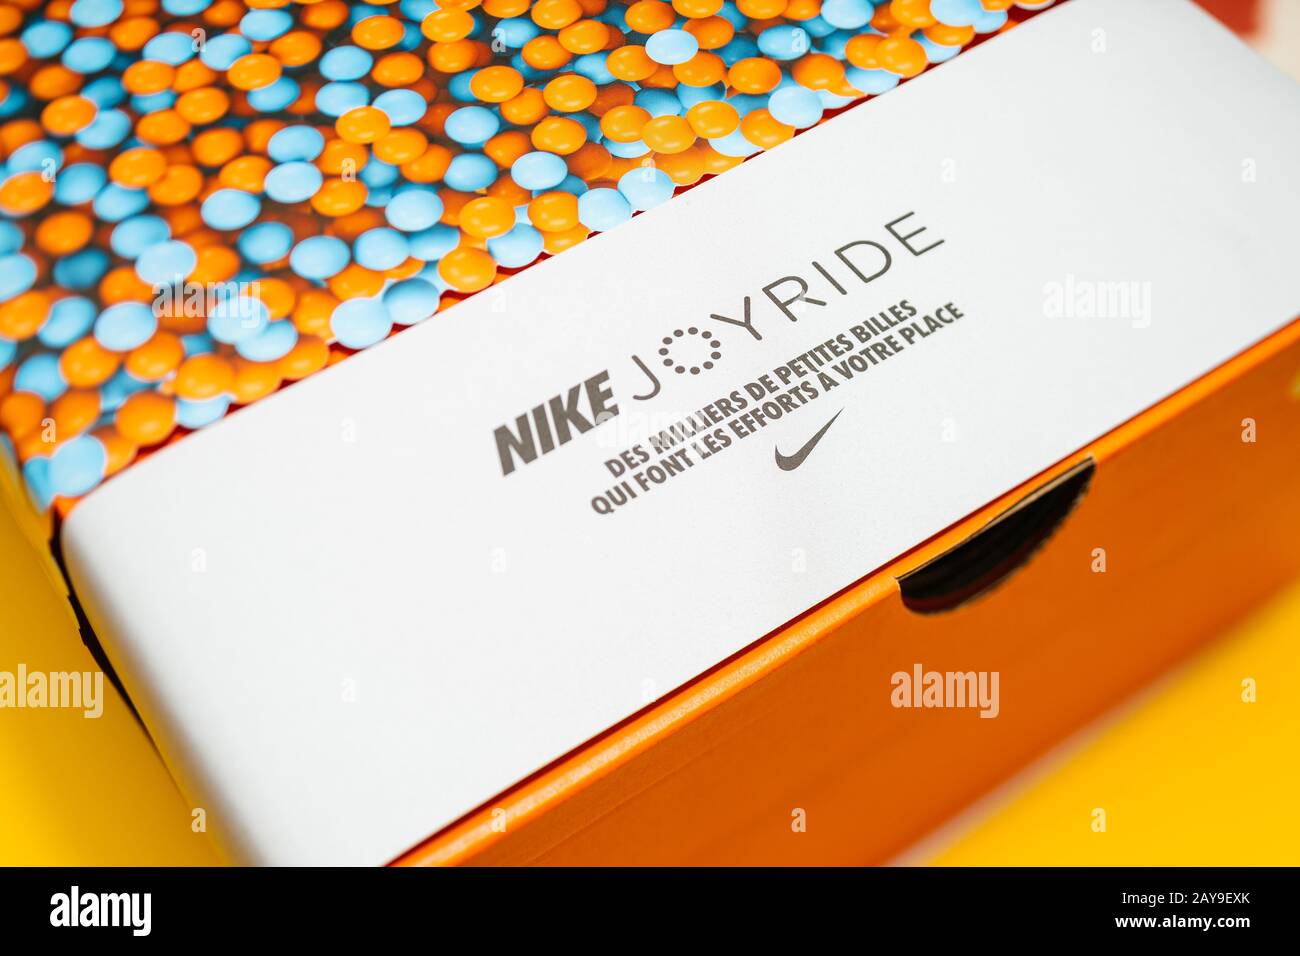 Paris, France - Jul 30, 2019: Close-up macro view of latest innovation from  Nike Sports the Joyride running shoes - package isolated on yellow  background Stock Photo - Alamy